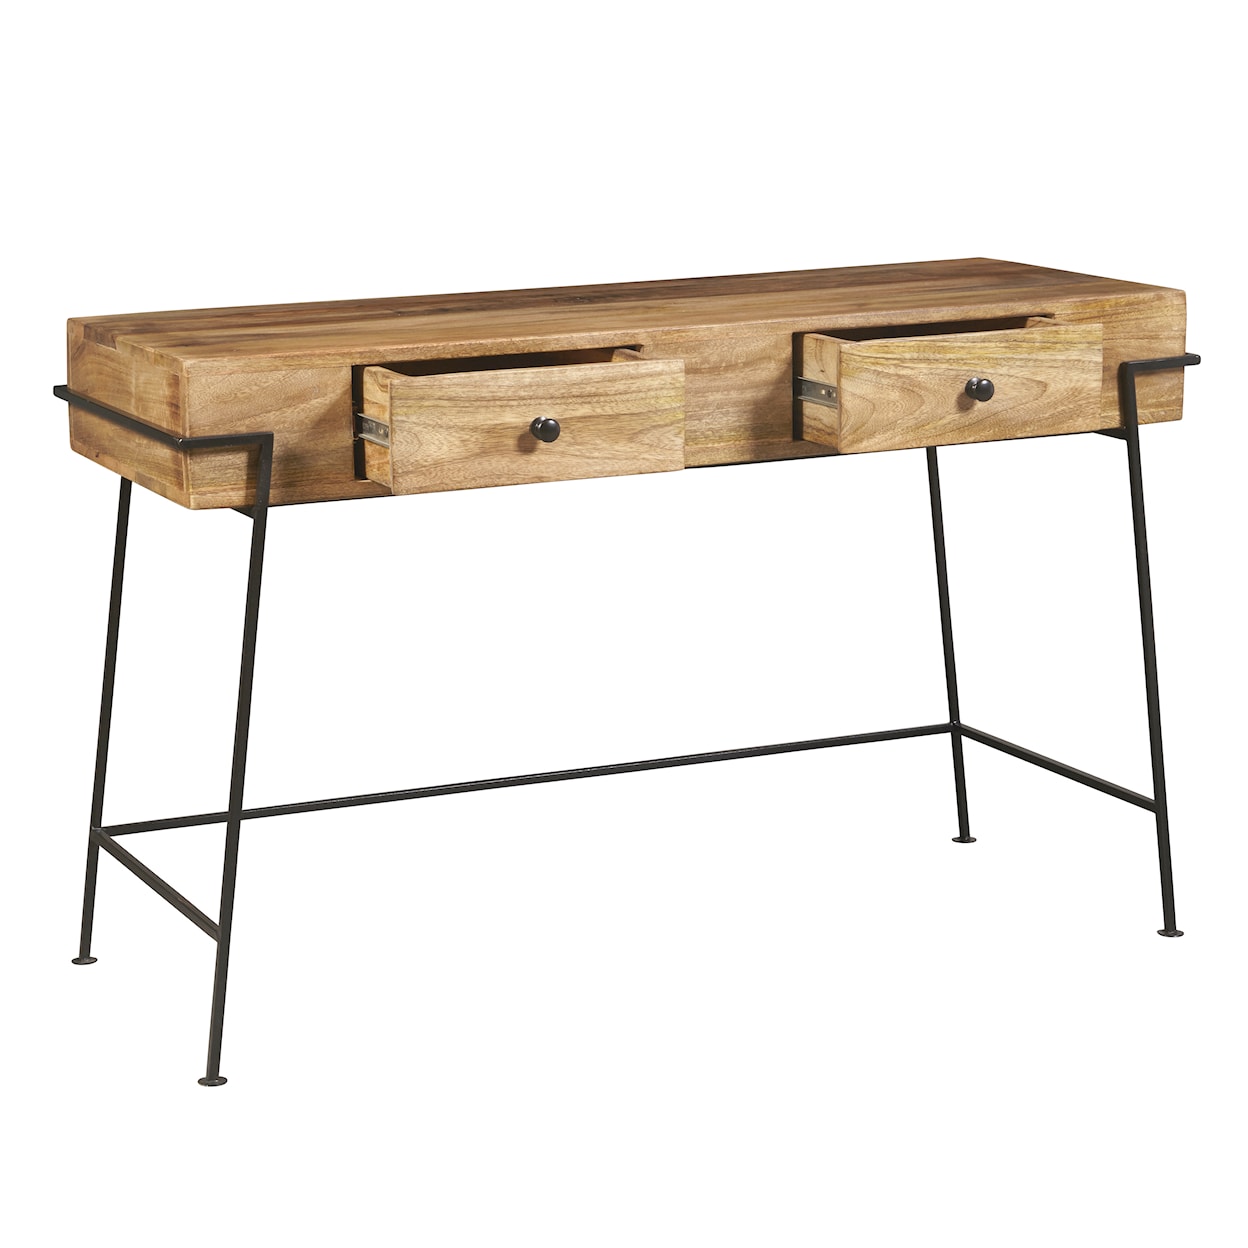 Accentrics Home Accents Two Drawer Butcher Block Style Wooden Desk